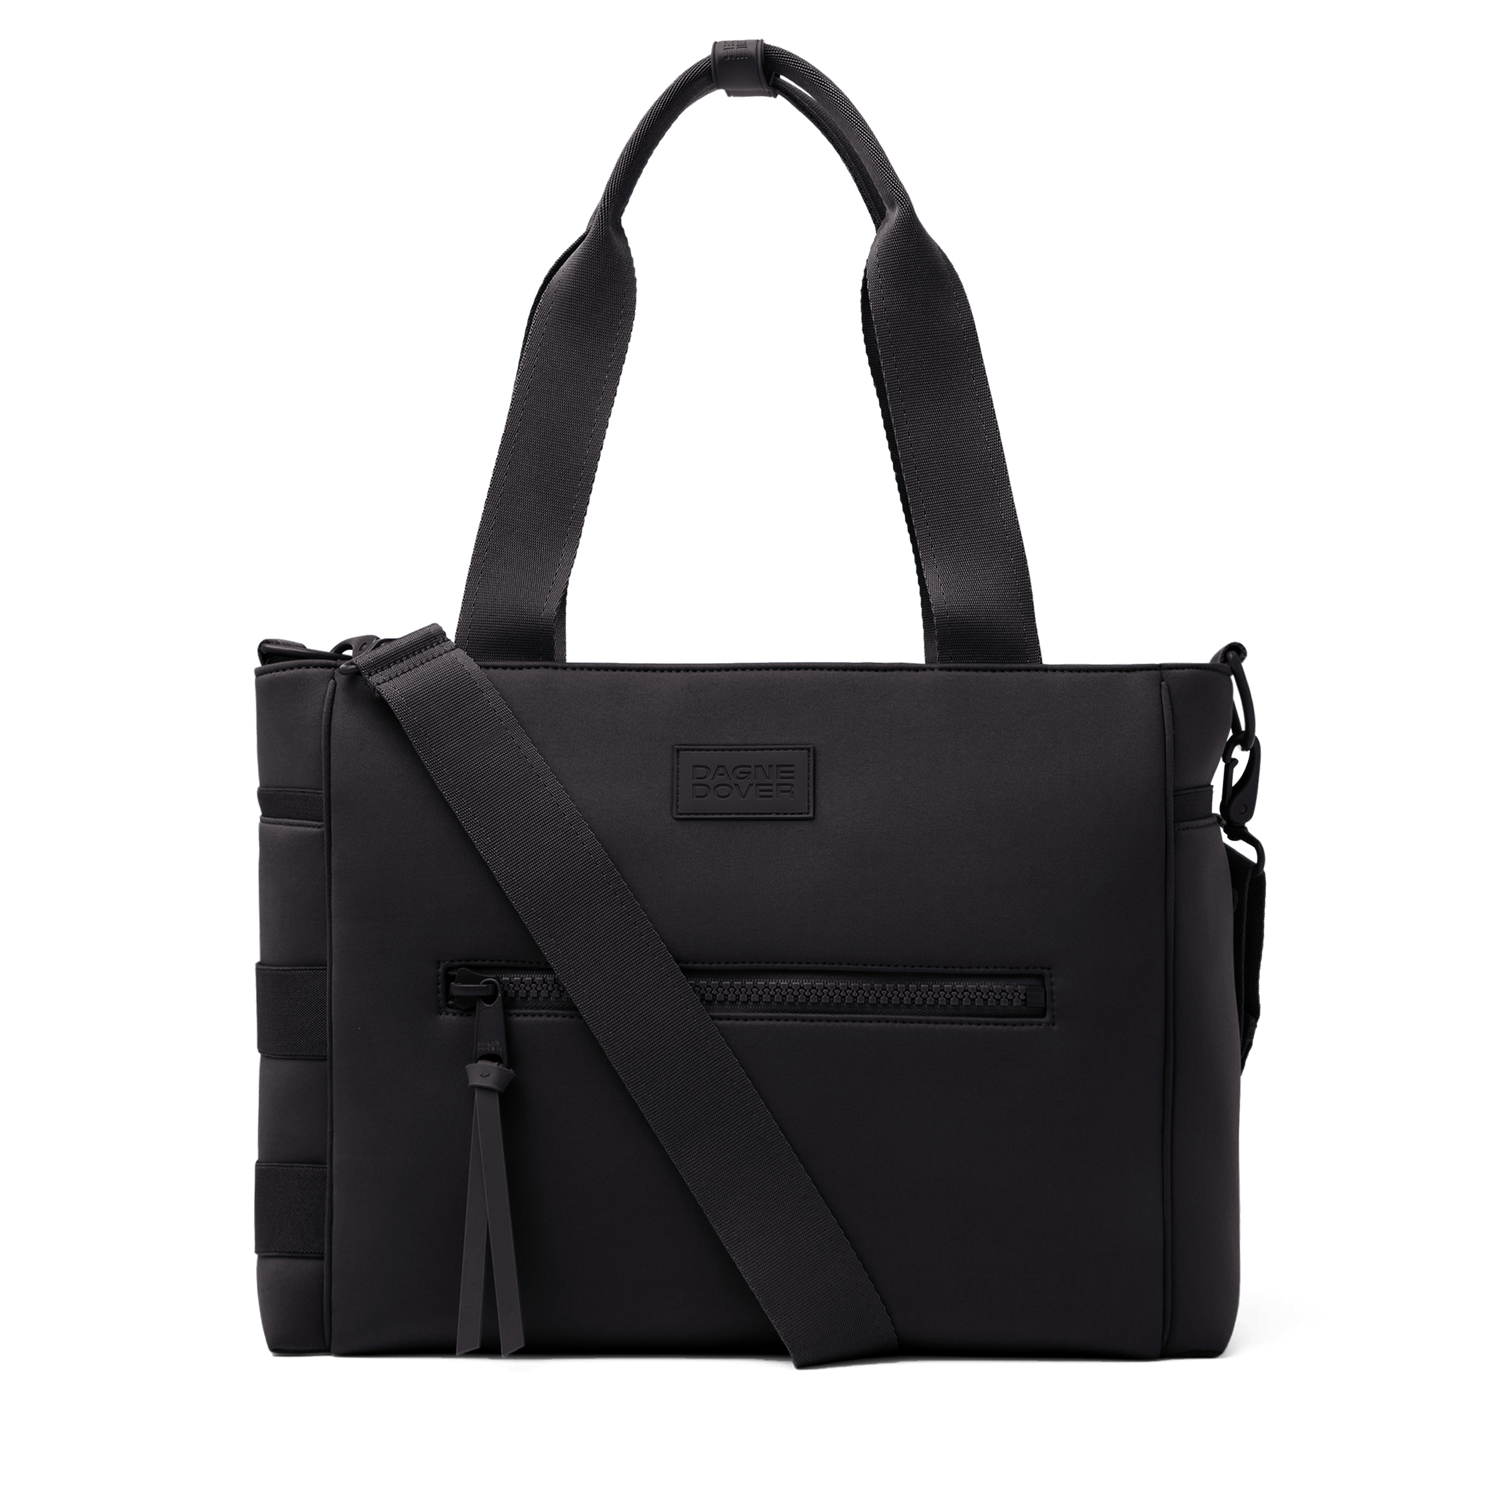 Dagne Dover Large Wade Diaper Tote - Onyx